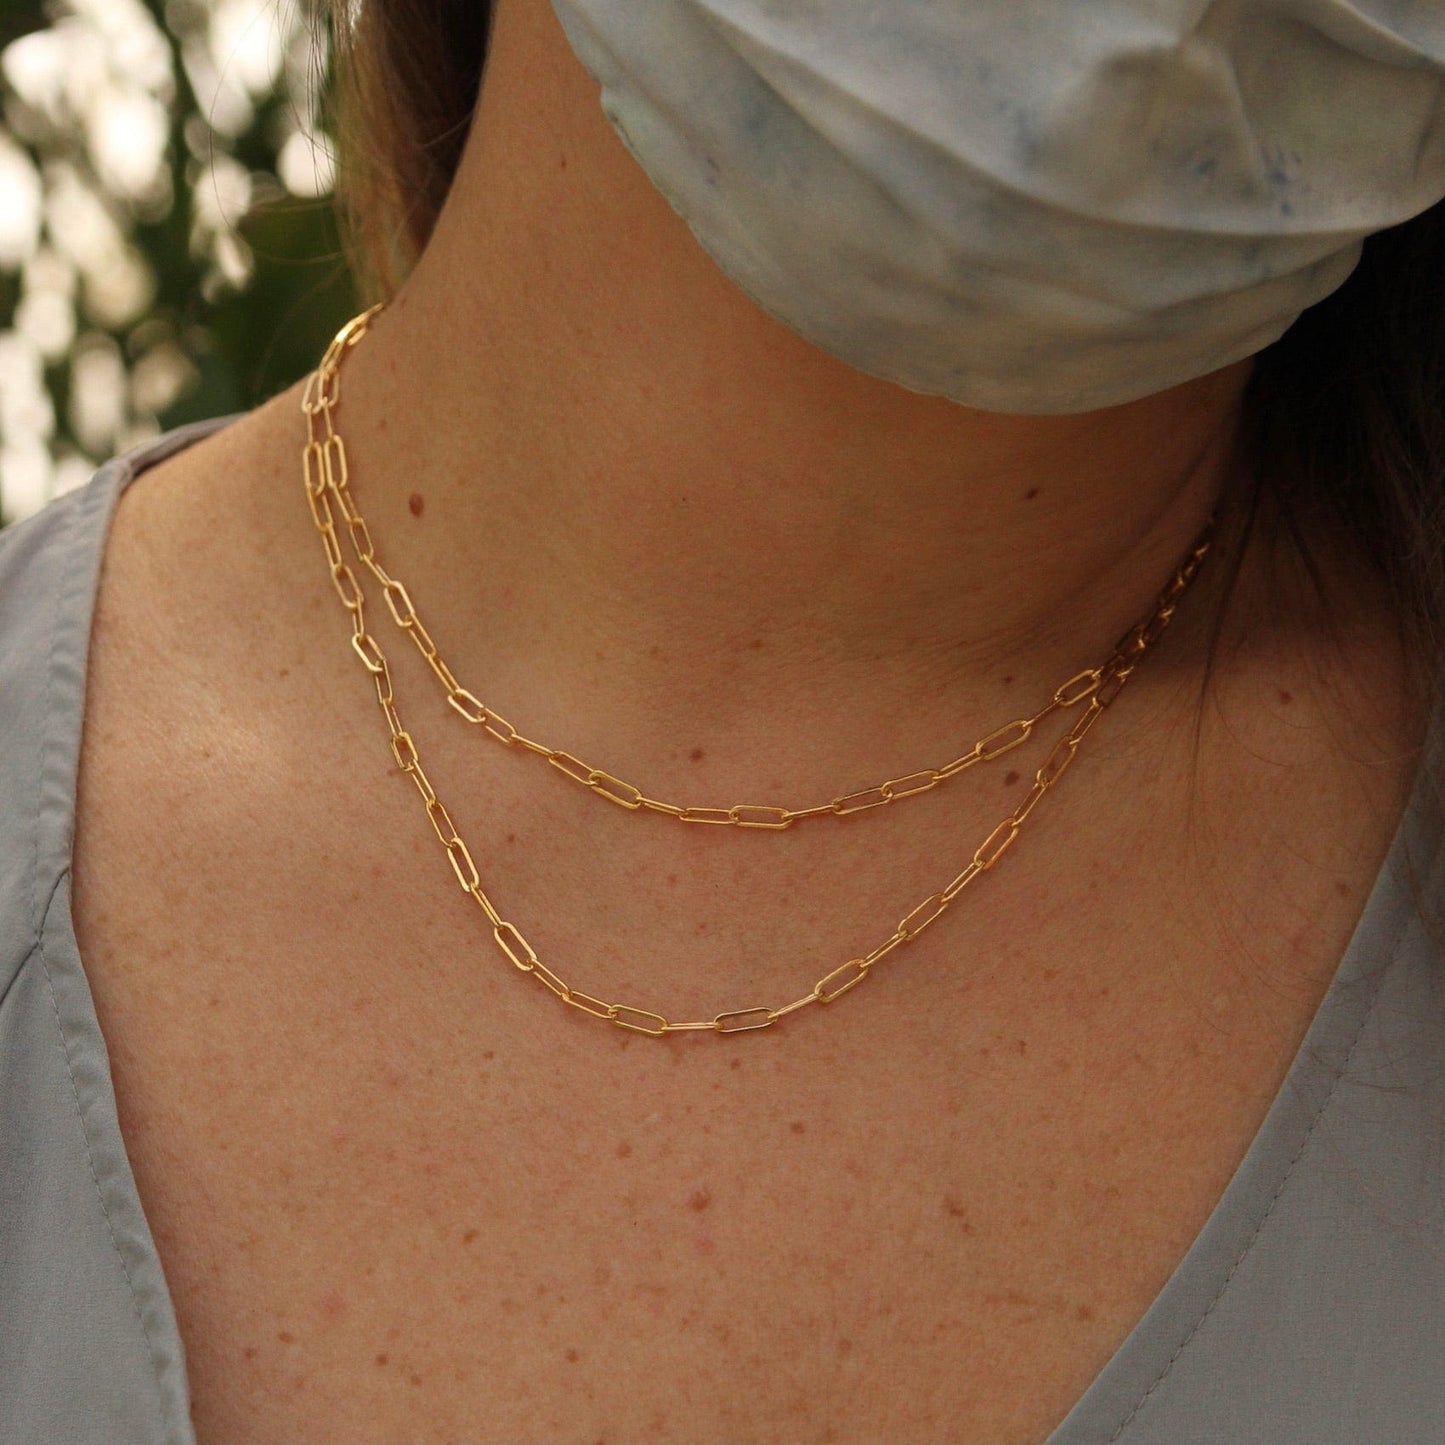 NKL-GF Gold Filled Double Paperclip Chain Necklace